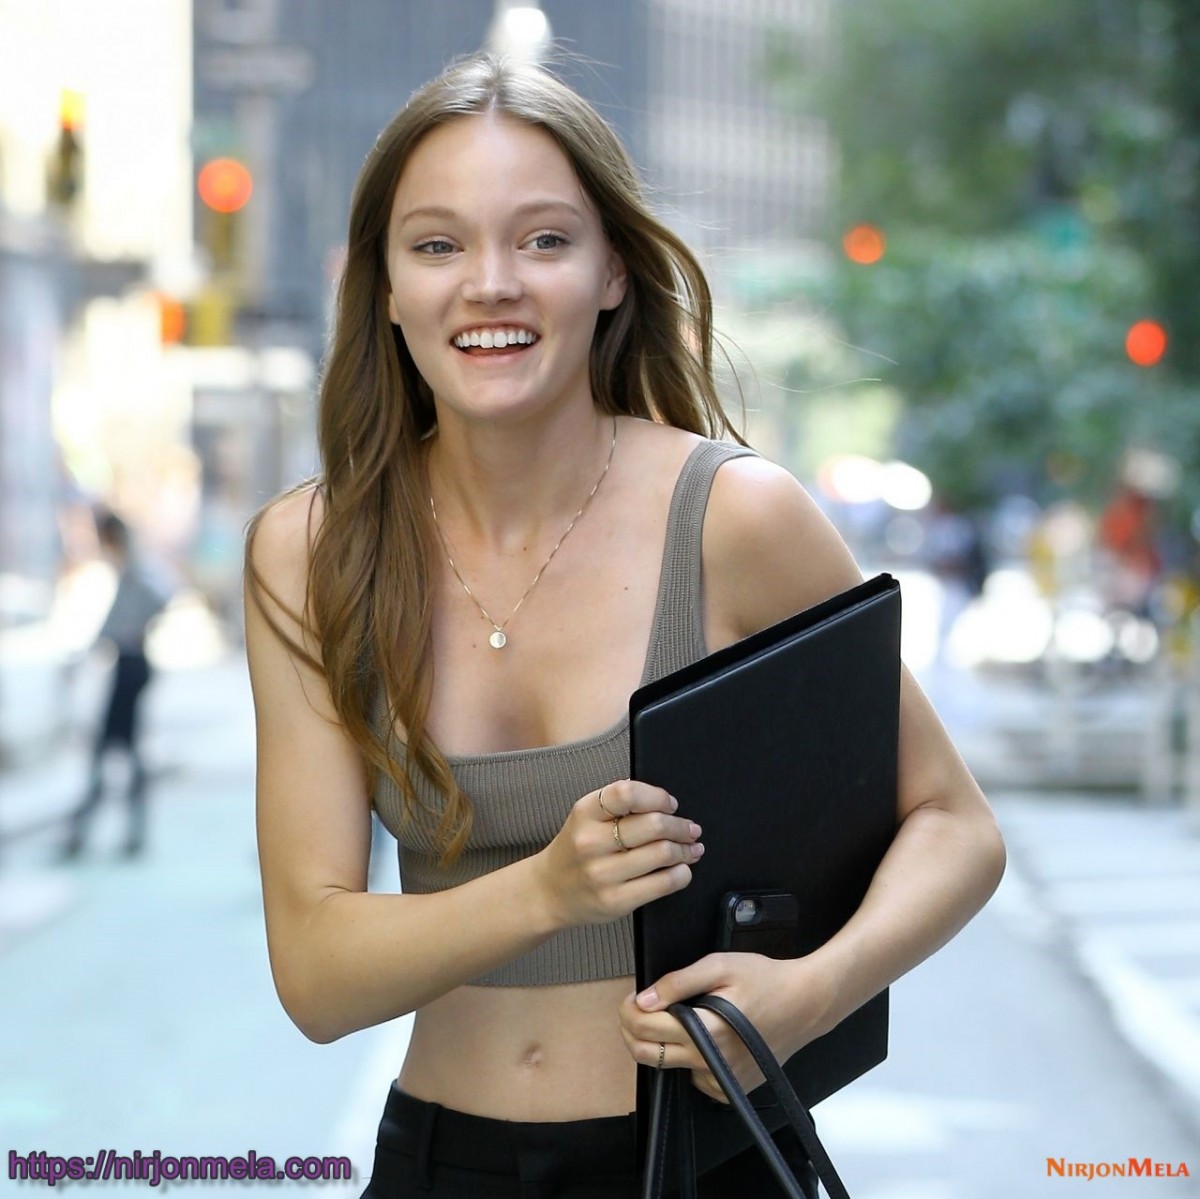 jessica-whitlow-casting-call-for-the-victoria-s-secret-fashion-show-2018-in-nyc-0.jpg